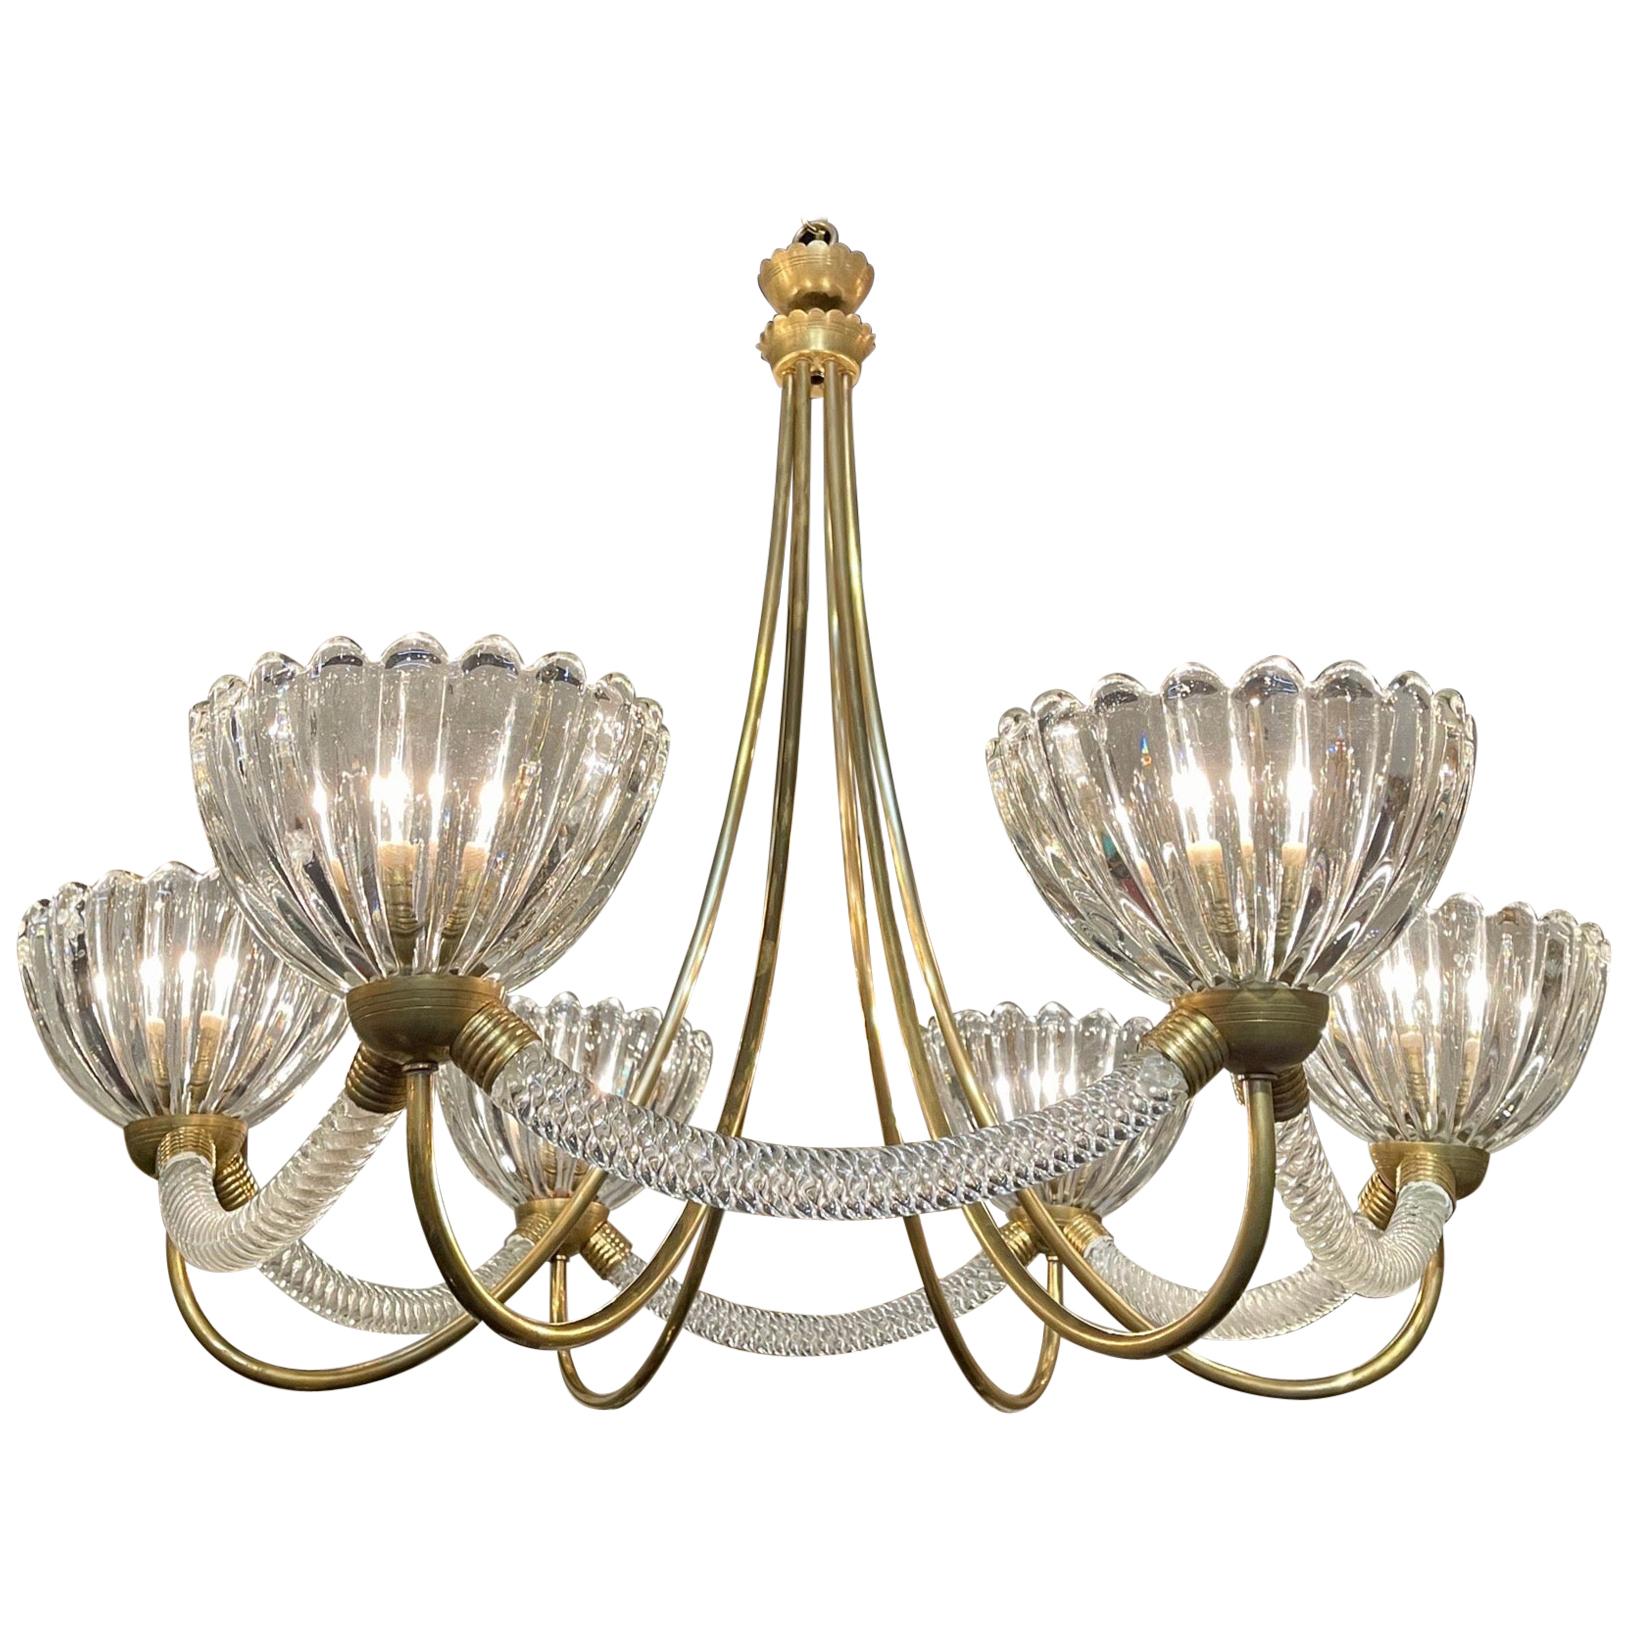 Vintage Italian 6 Light Glass and Brass Chandelier by Barovier and Toso